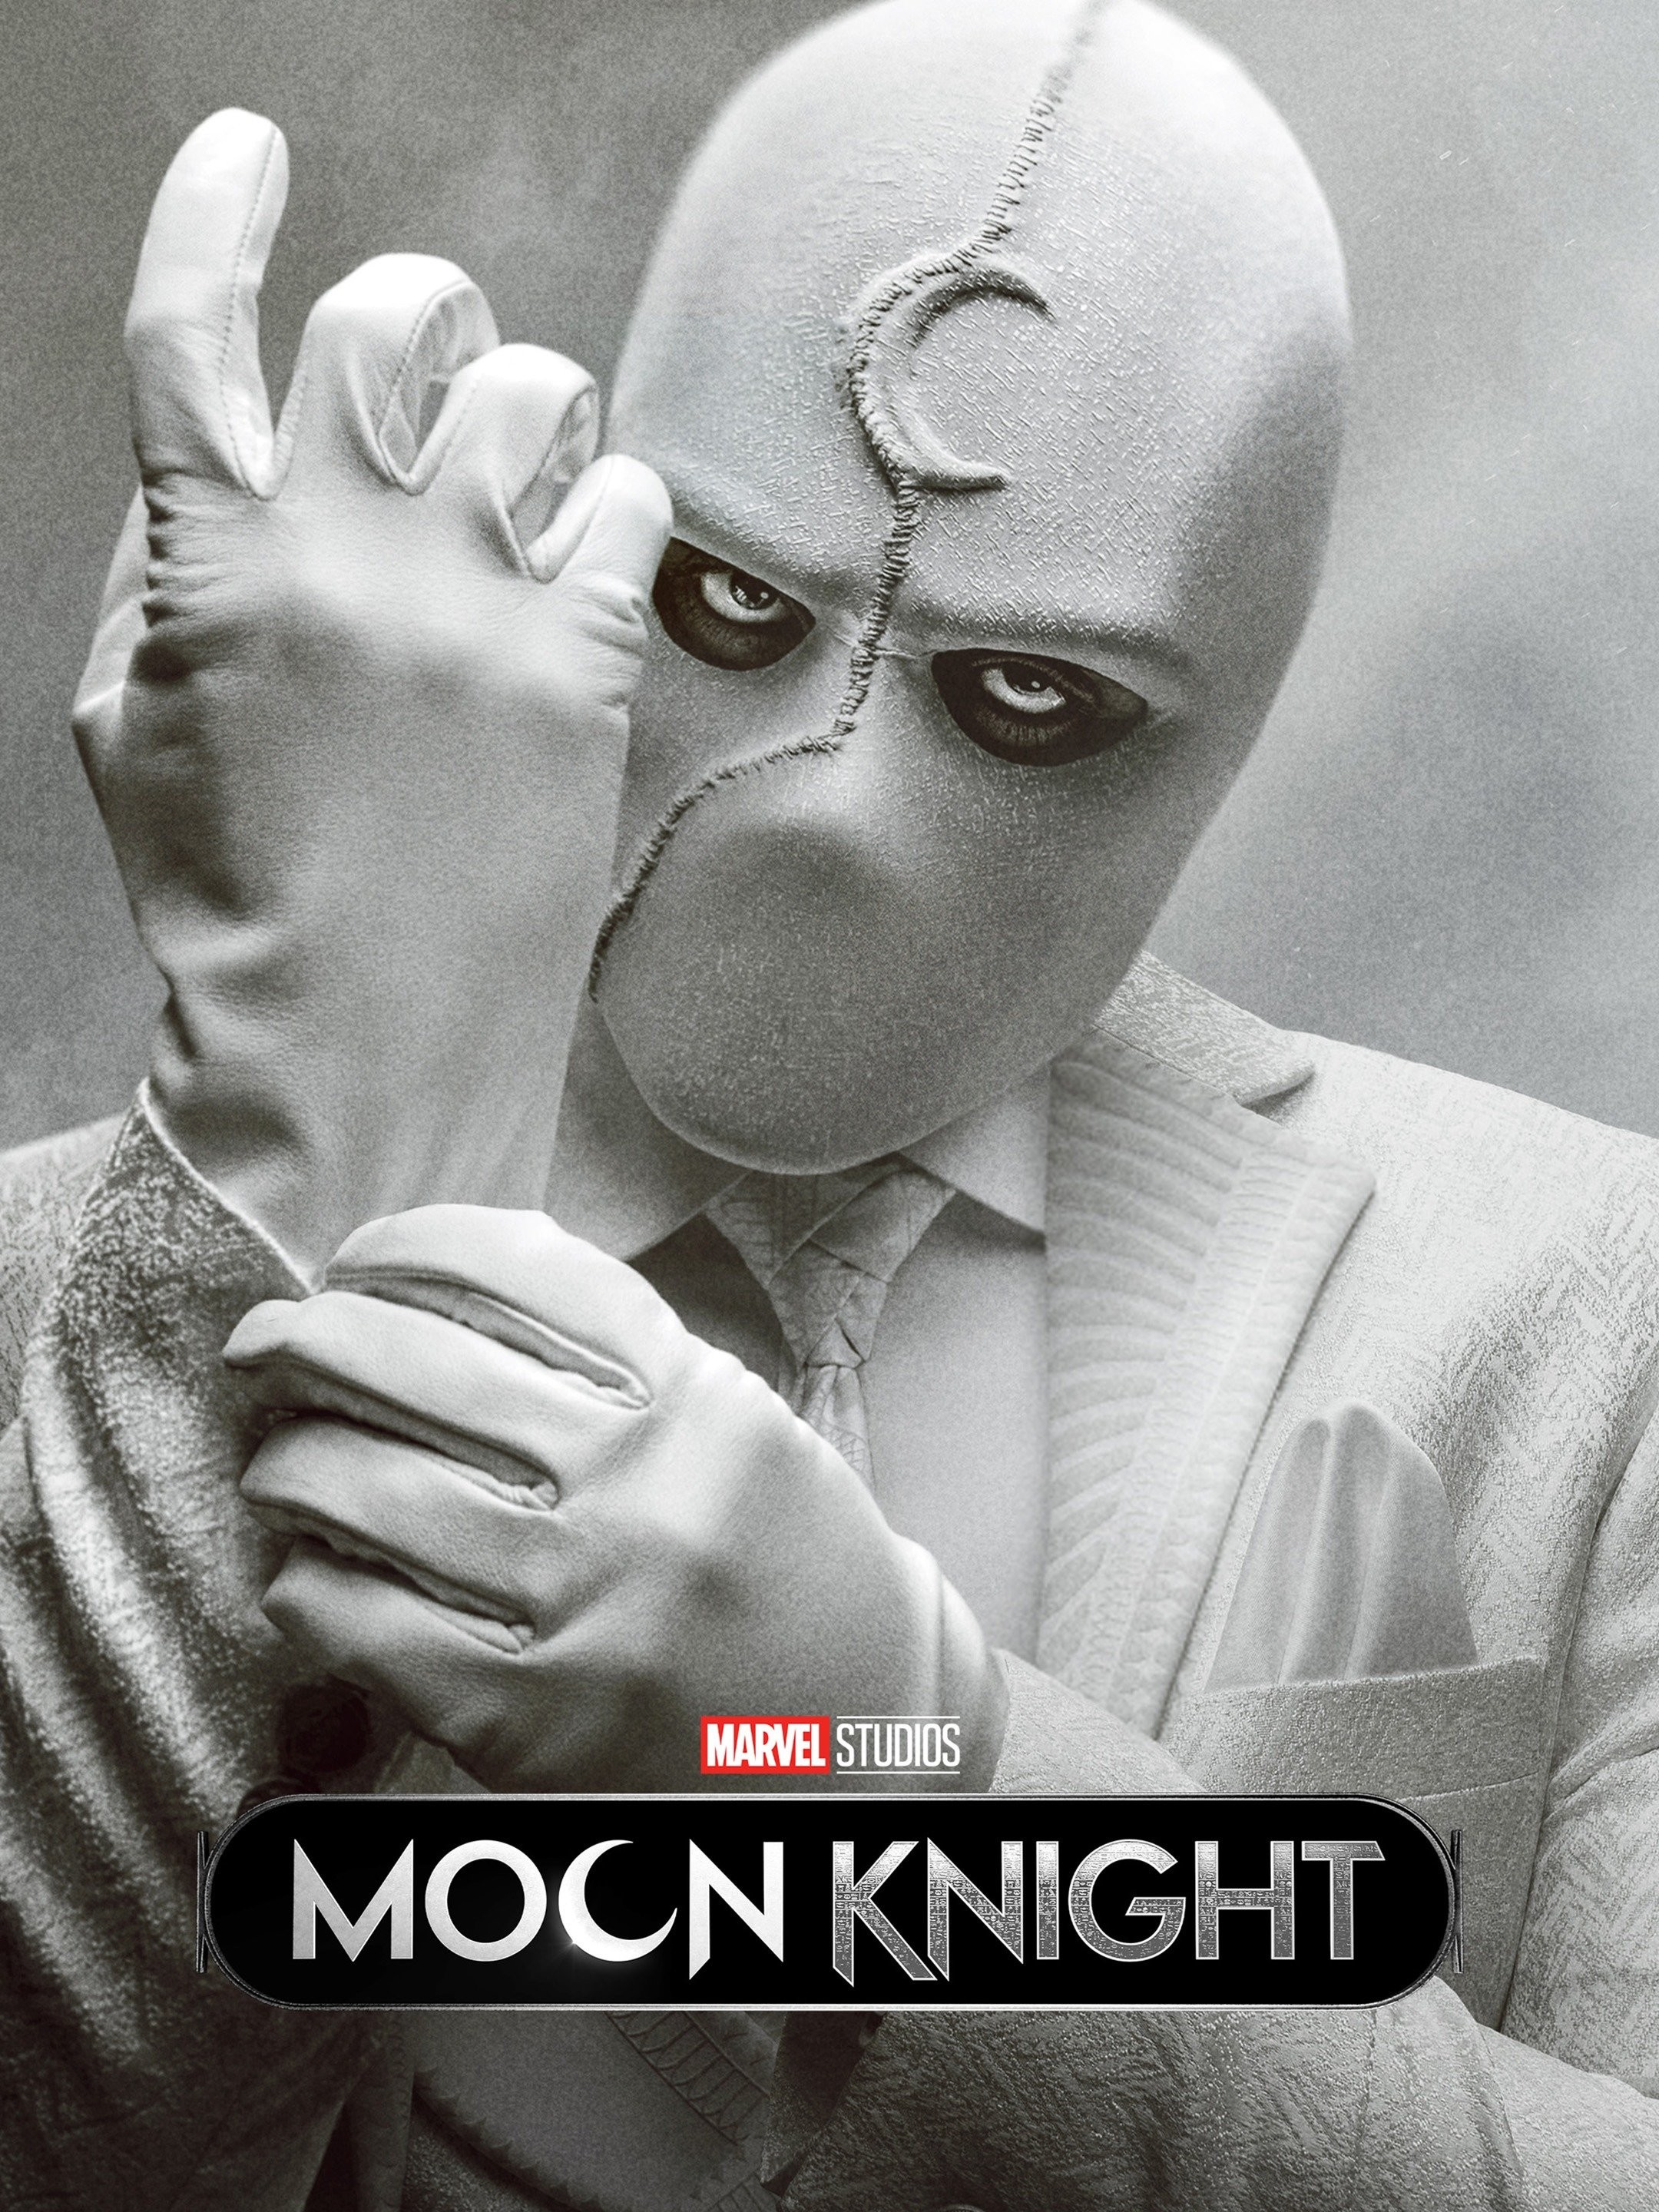 Rotten Tomatoes - New images of Oscar Isaac in Moon Knight